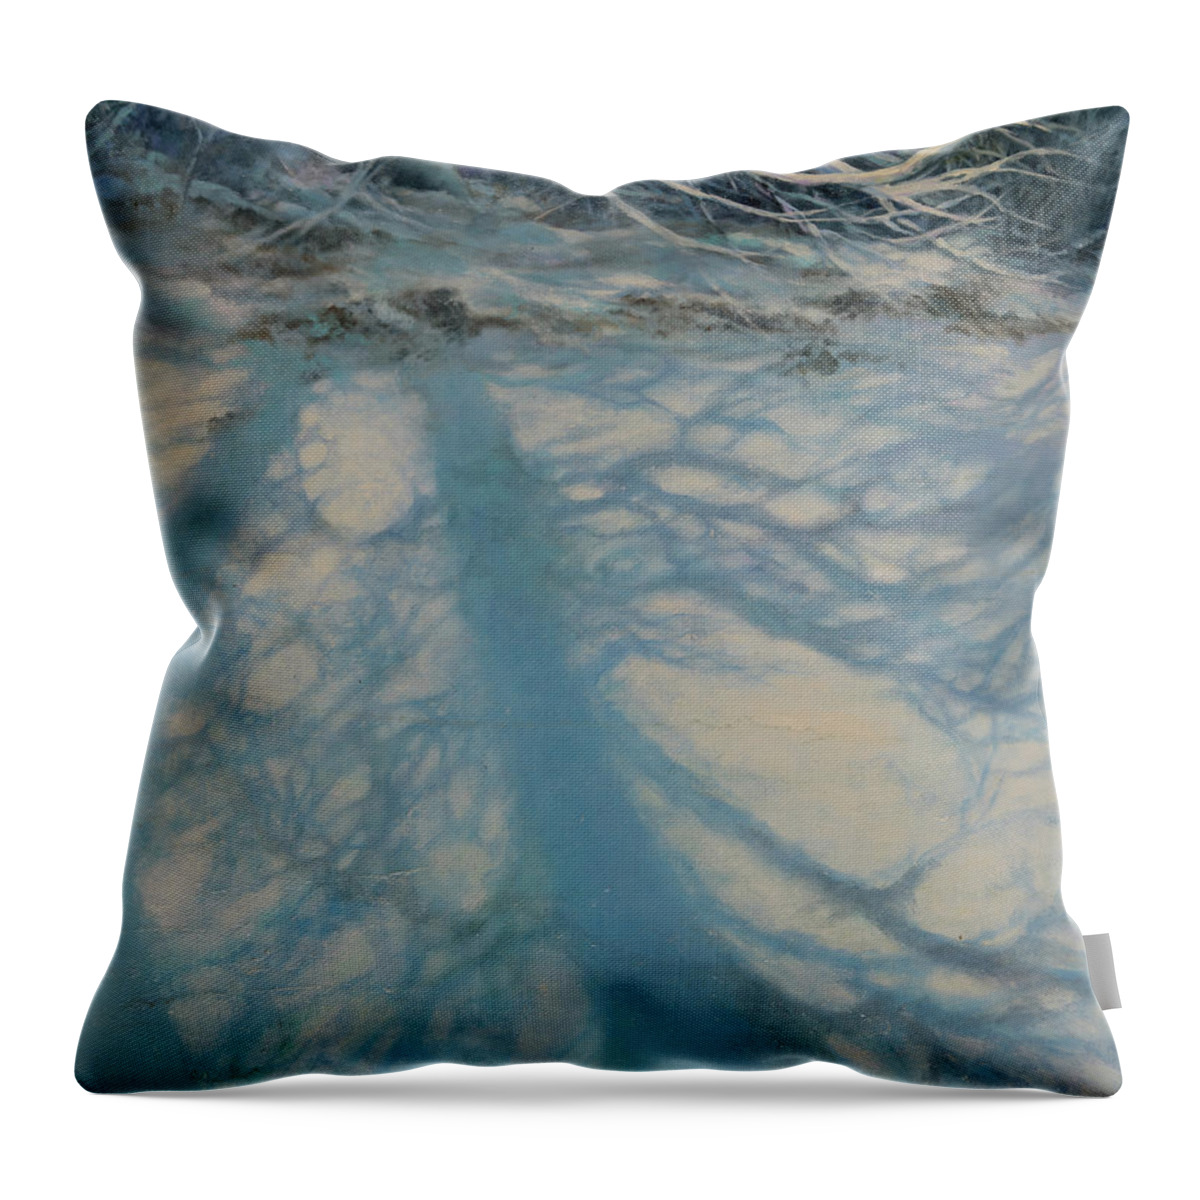 Snow Throw Pillow featuring the painting February Delight by Carol Klingel